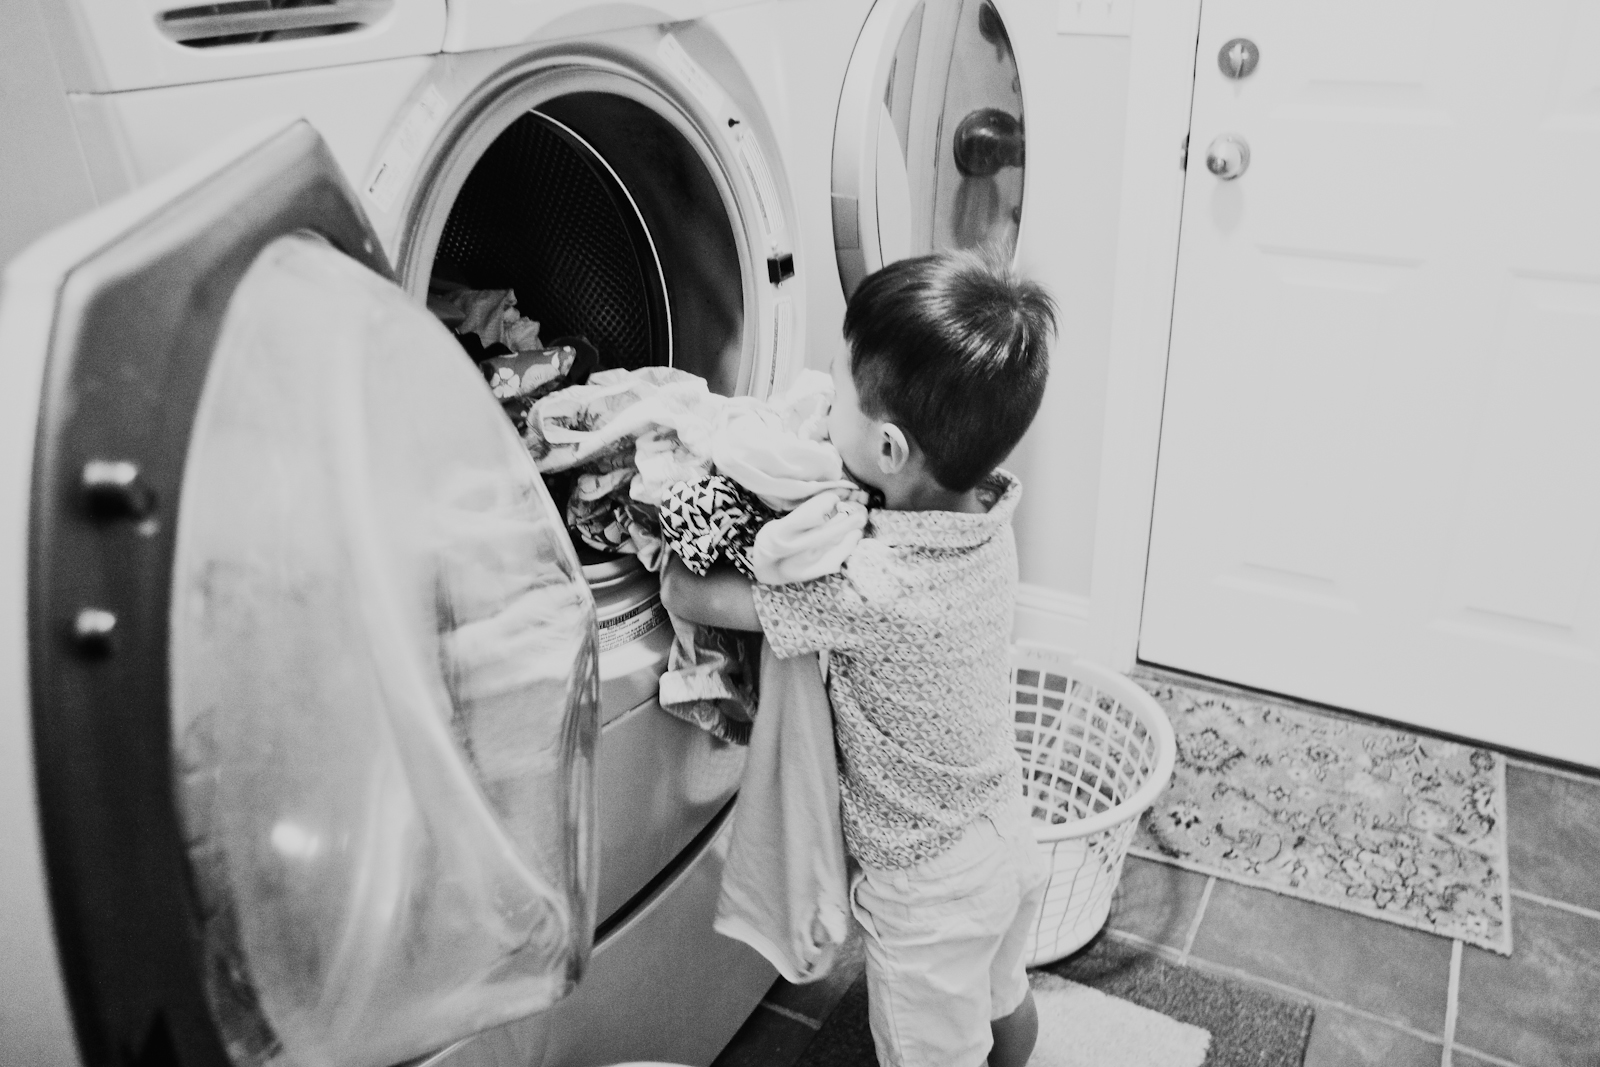 Toddler helping with laundry